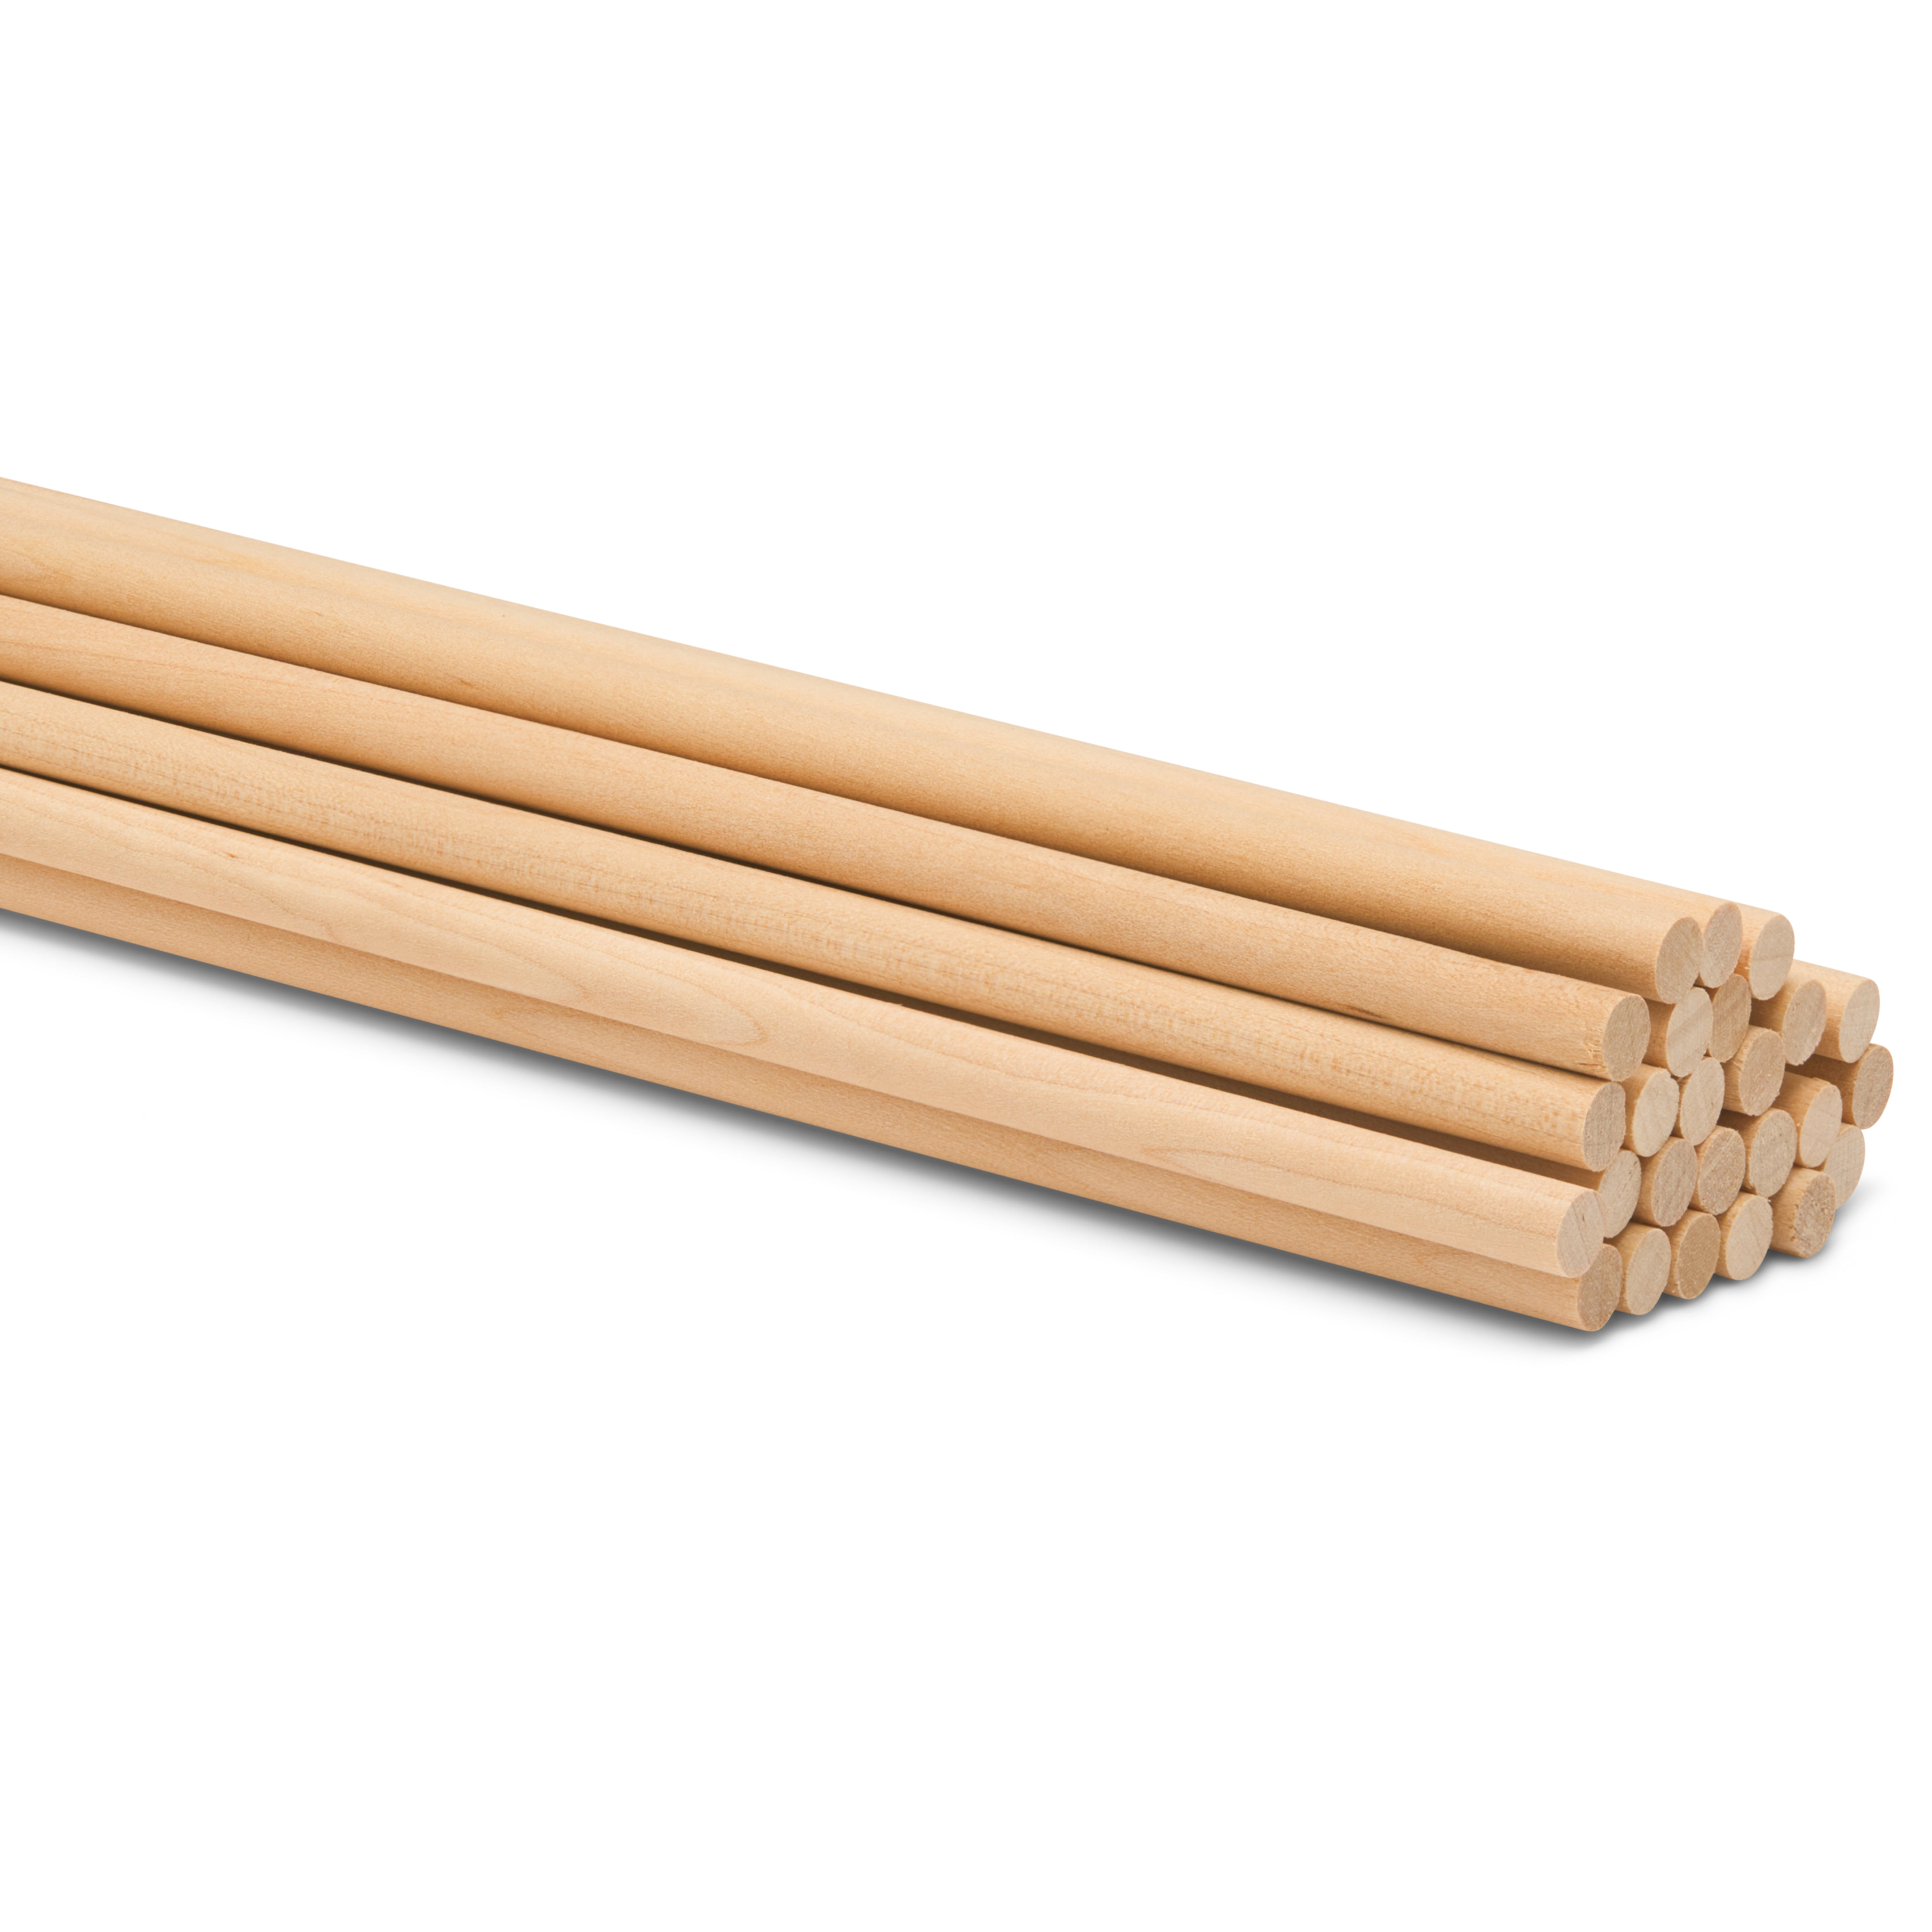 Wood 10 pieces 3 pack Dowel Rod 1/4 x 12 inches 